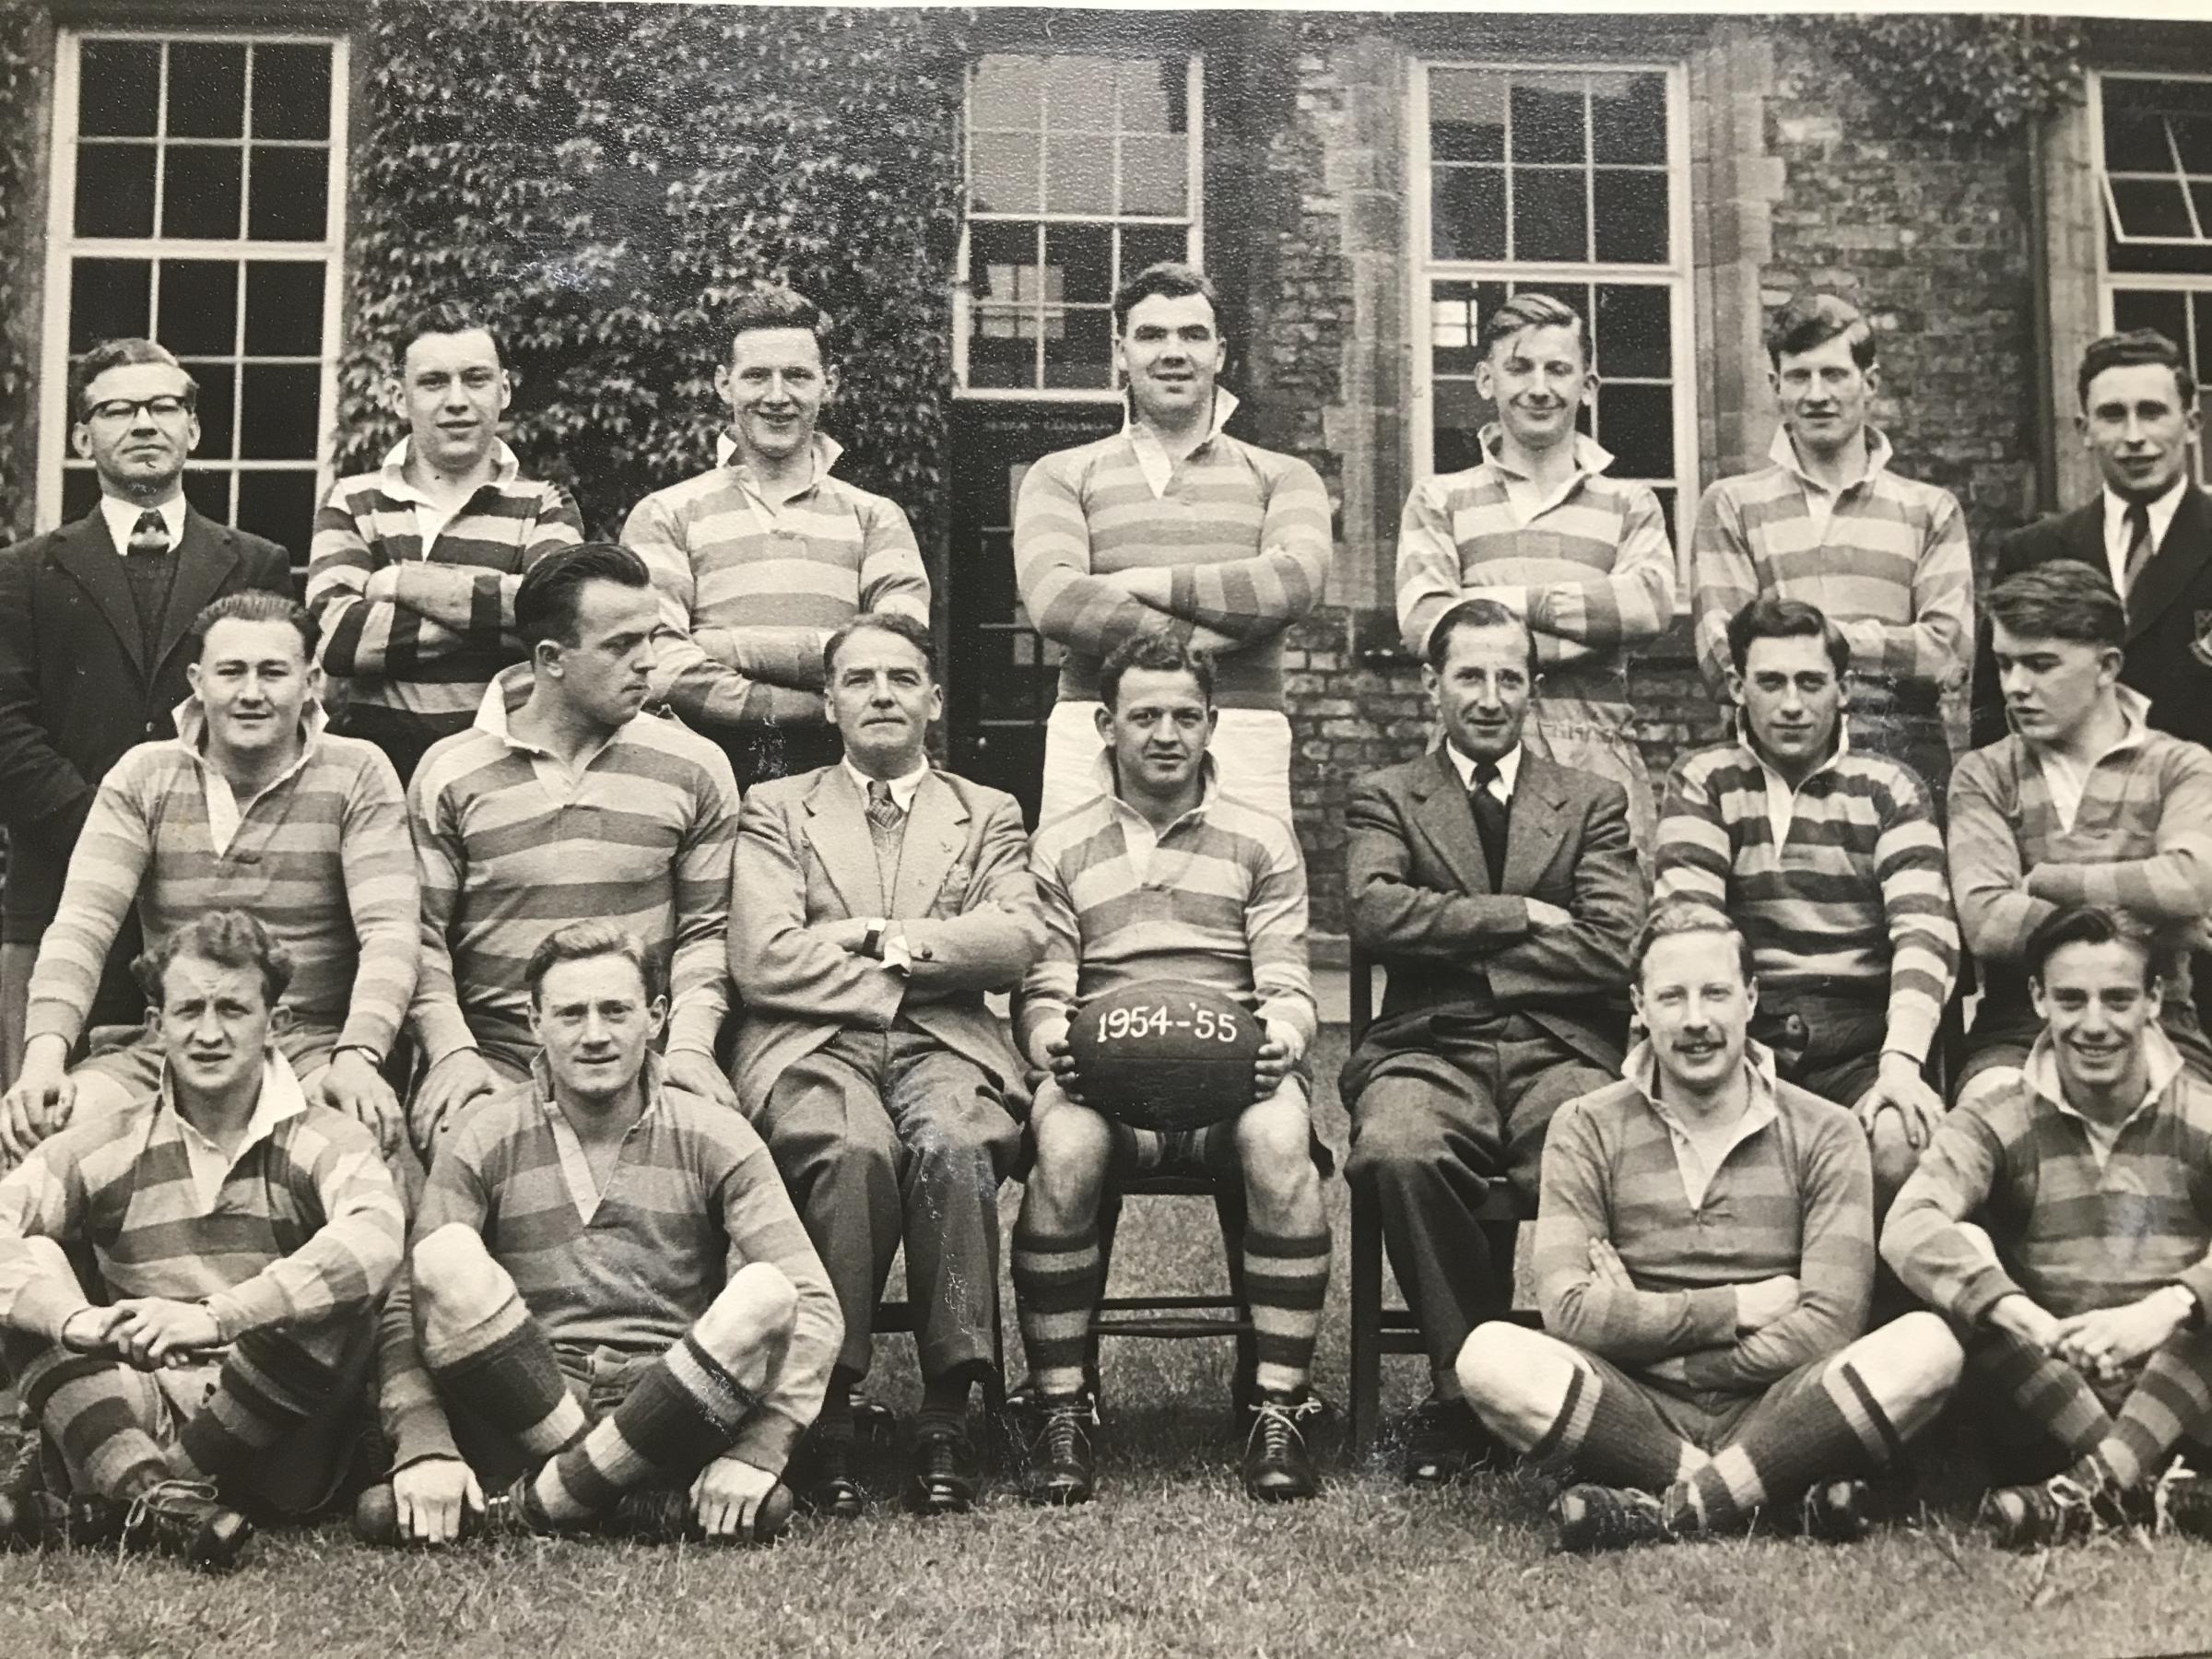 Jim Hammond, bottom row second from left, in the rugby team at St John’s College, York